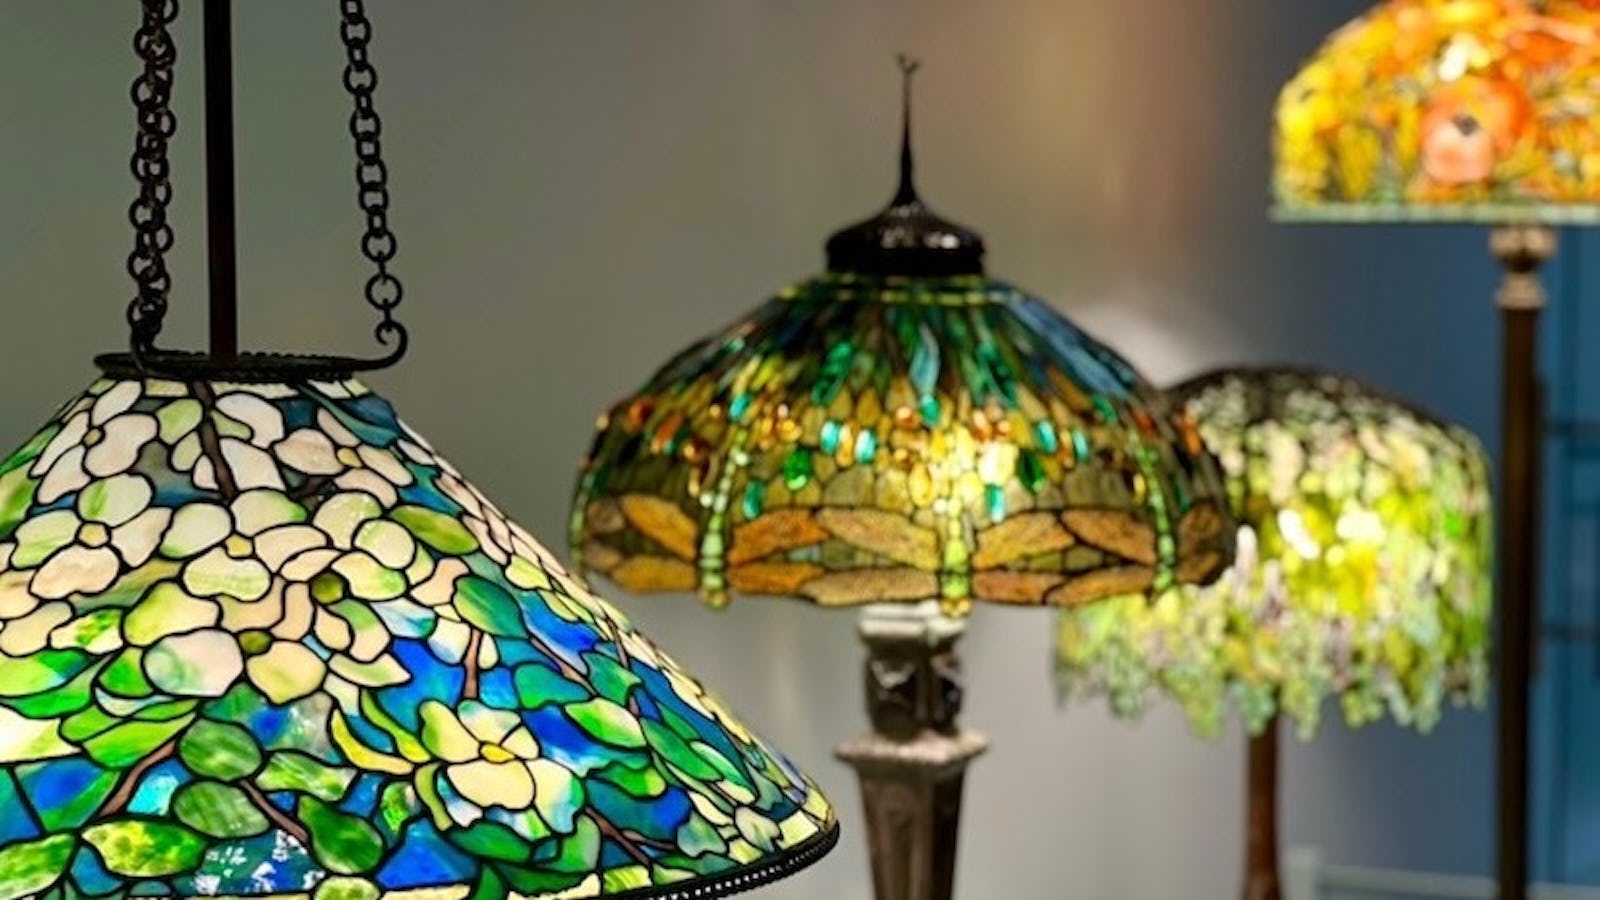 An assortment of lamps from The Neustadt collection of Tiffany glass.